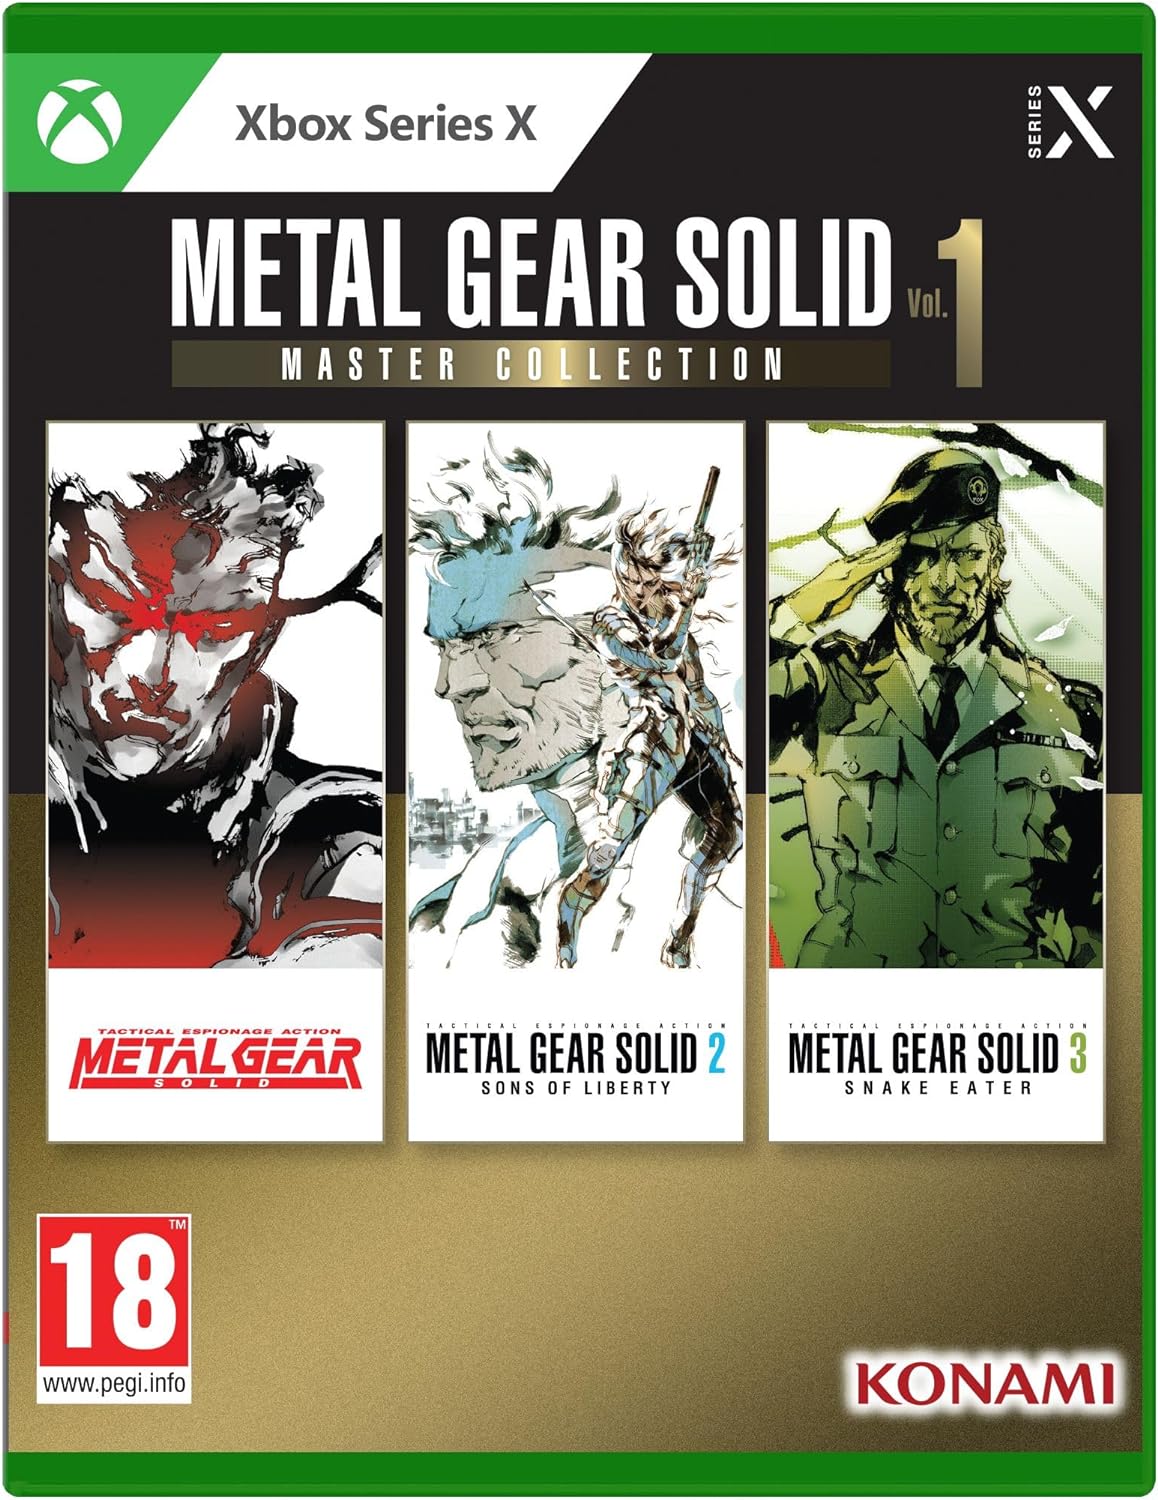 XBOX METAL GEAR SOLID MASTER COLLECTION VOL. 1